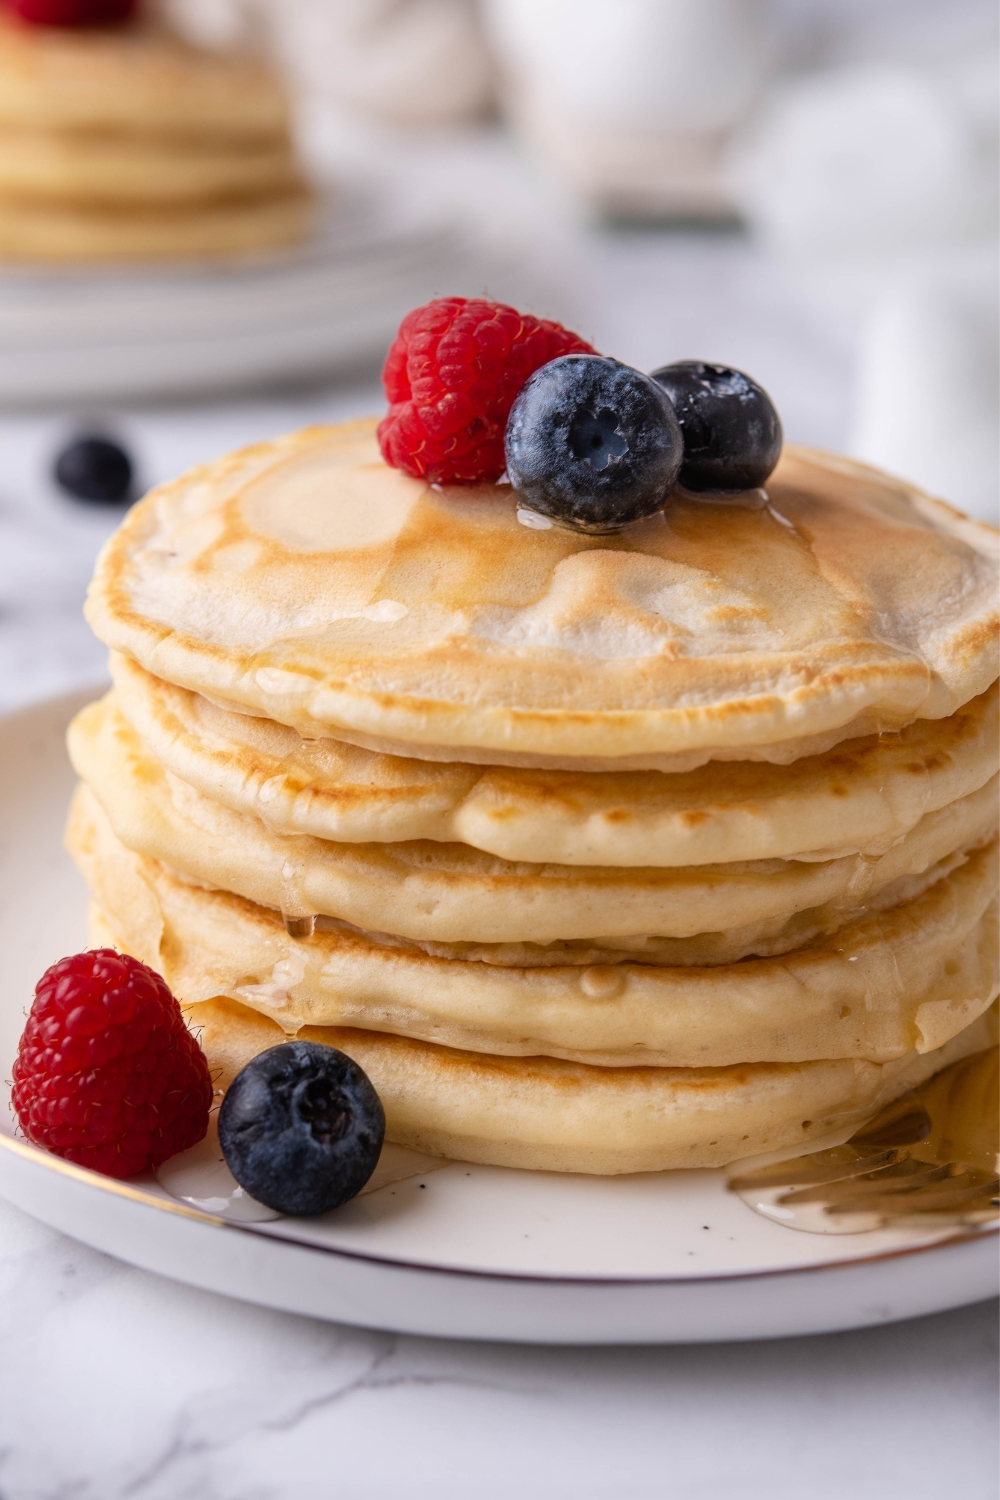 A stack of pancakes drizzled with maple syrup and topped with fresh berries on a plate.